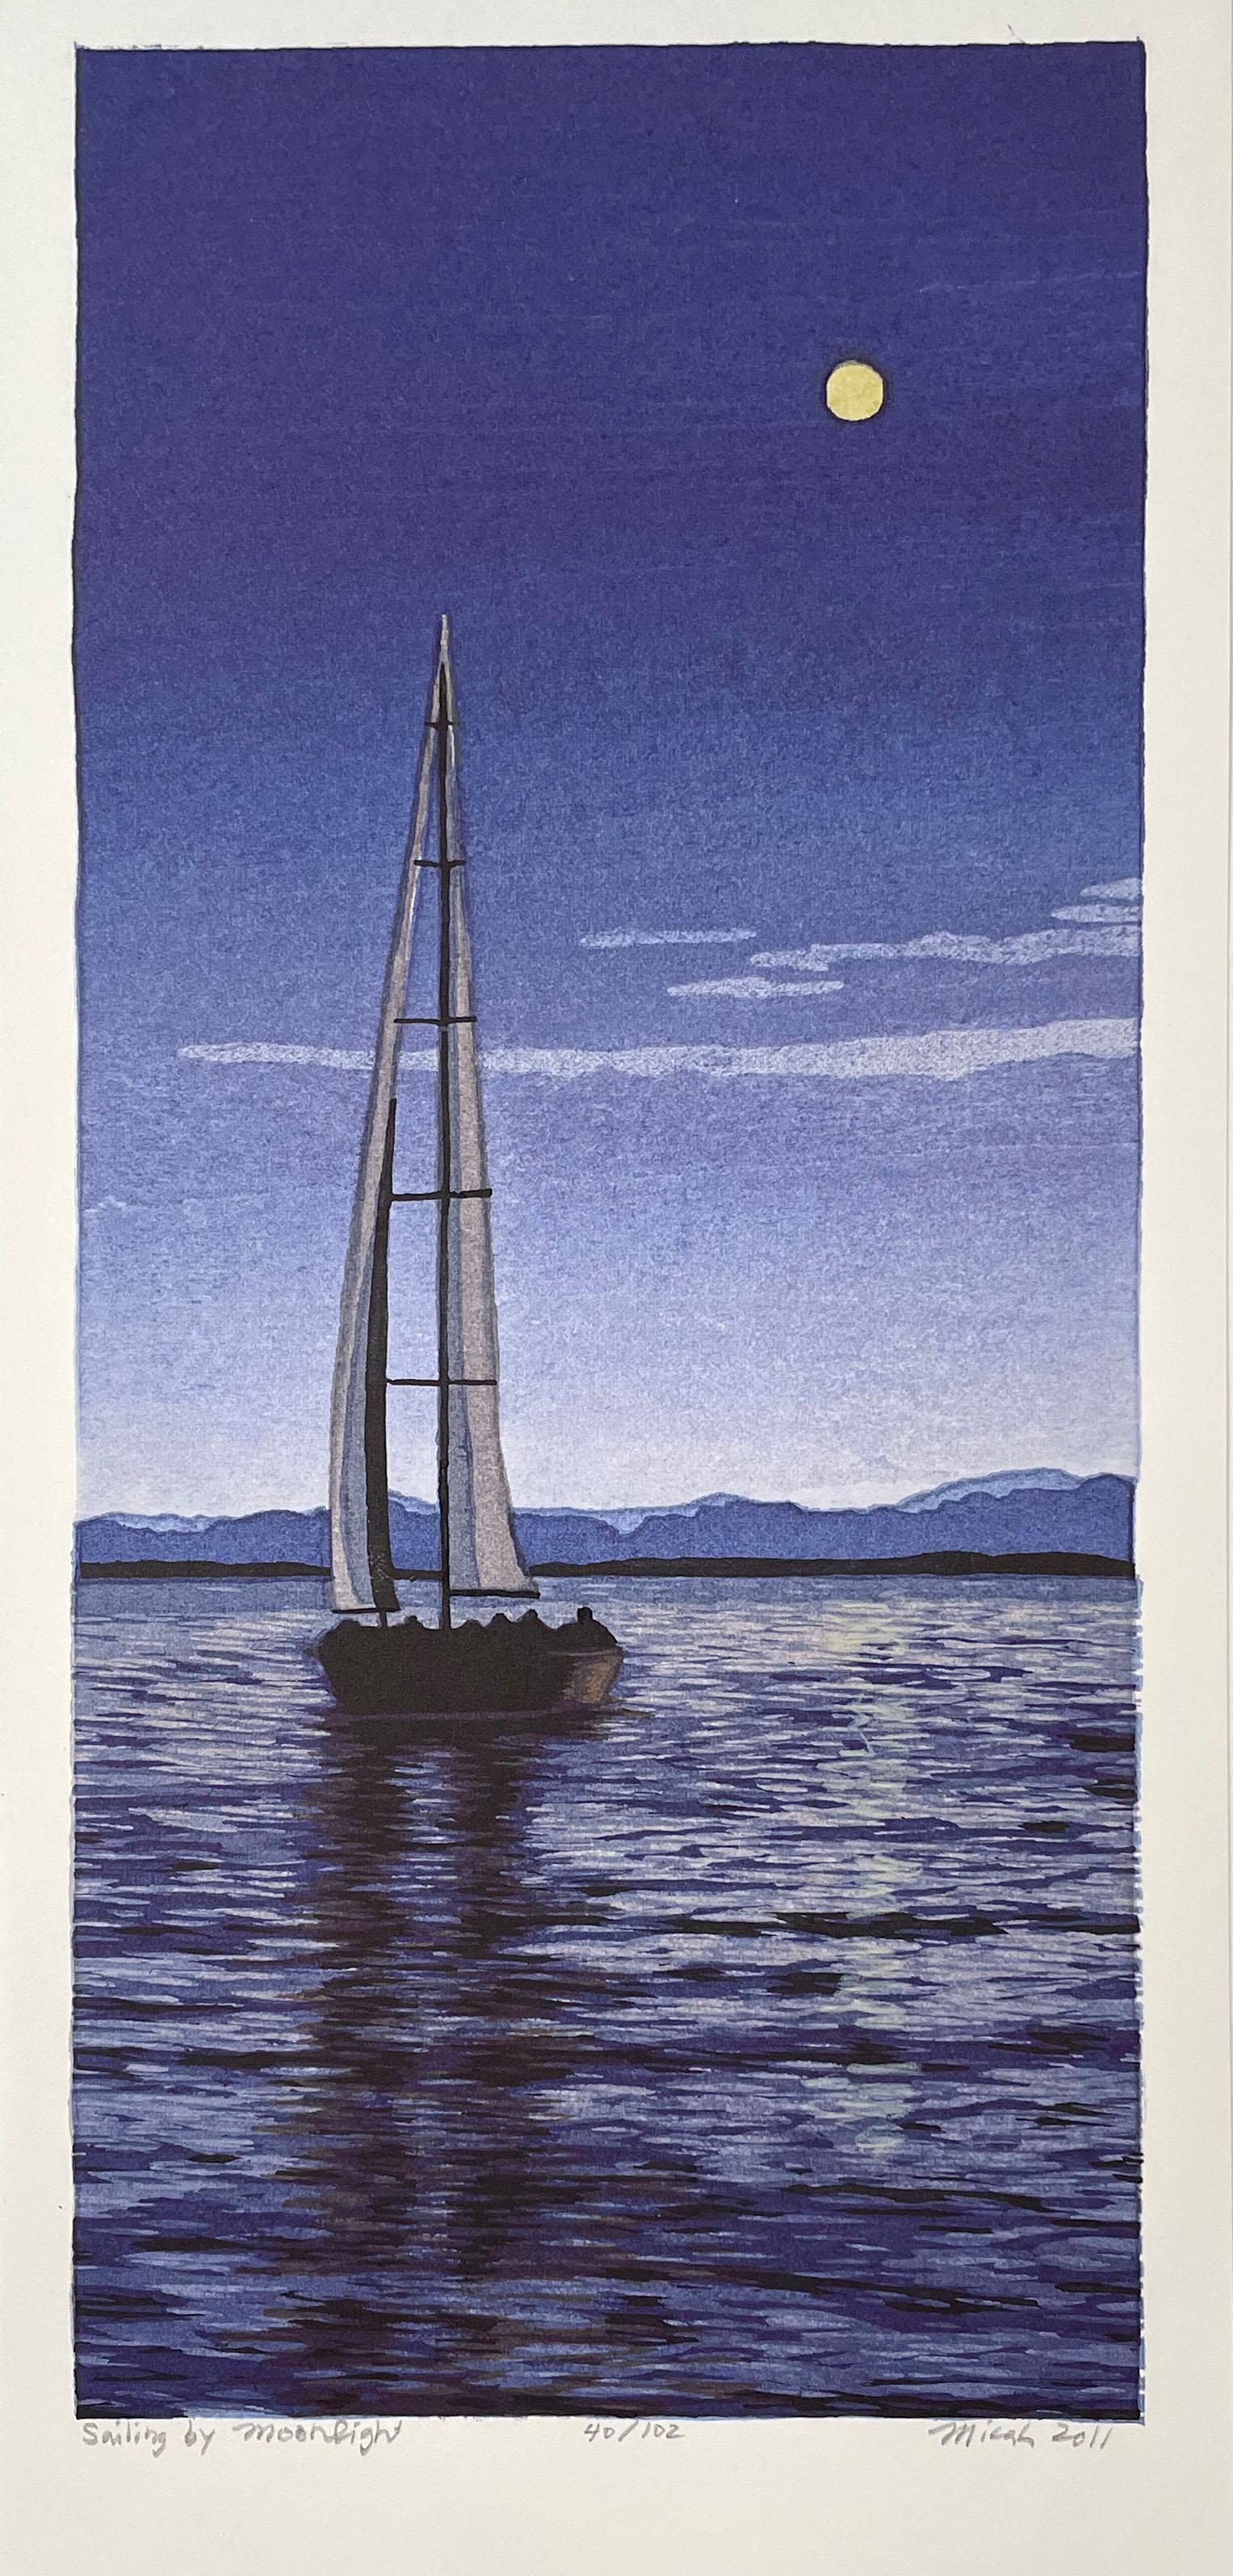 Sailing by Moonlight - Print by Micah Schwaberow